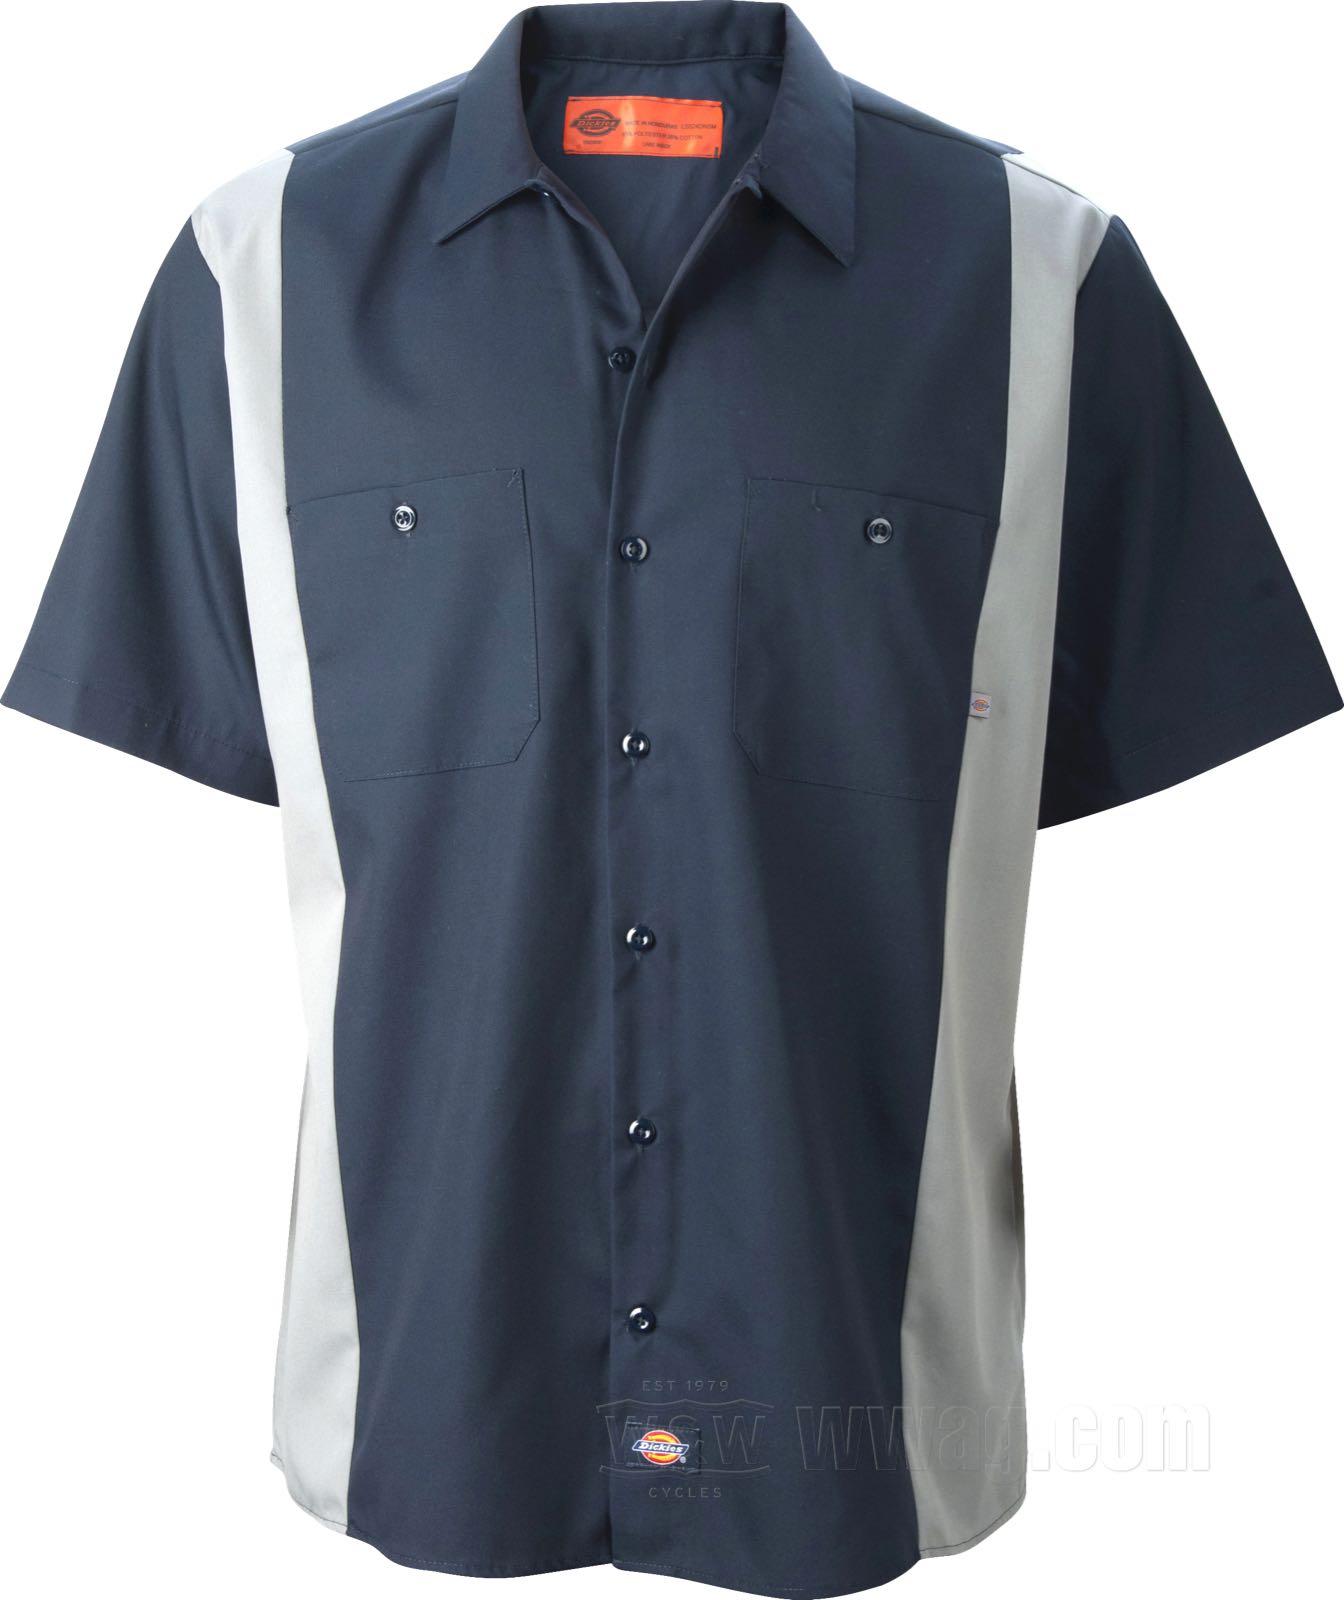 W&W Cycles - Dickies Color Block Work Shirts for Harley-Davidson